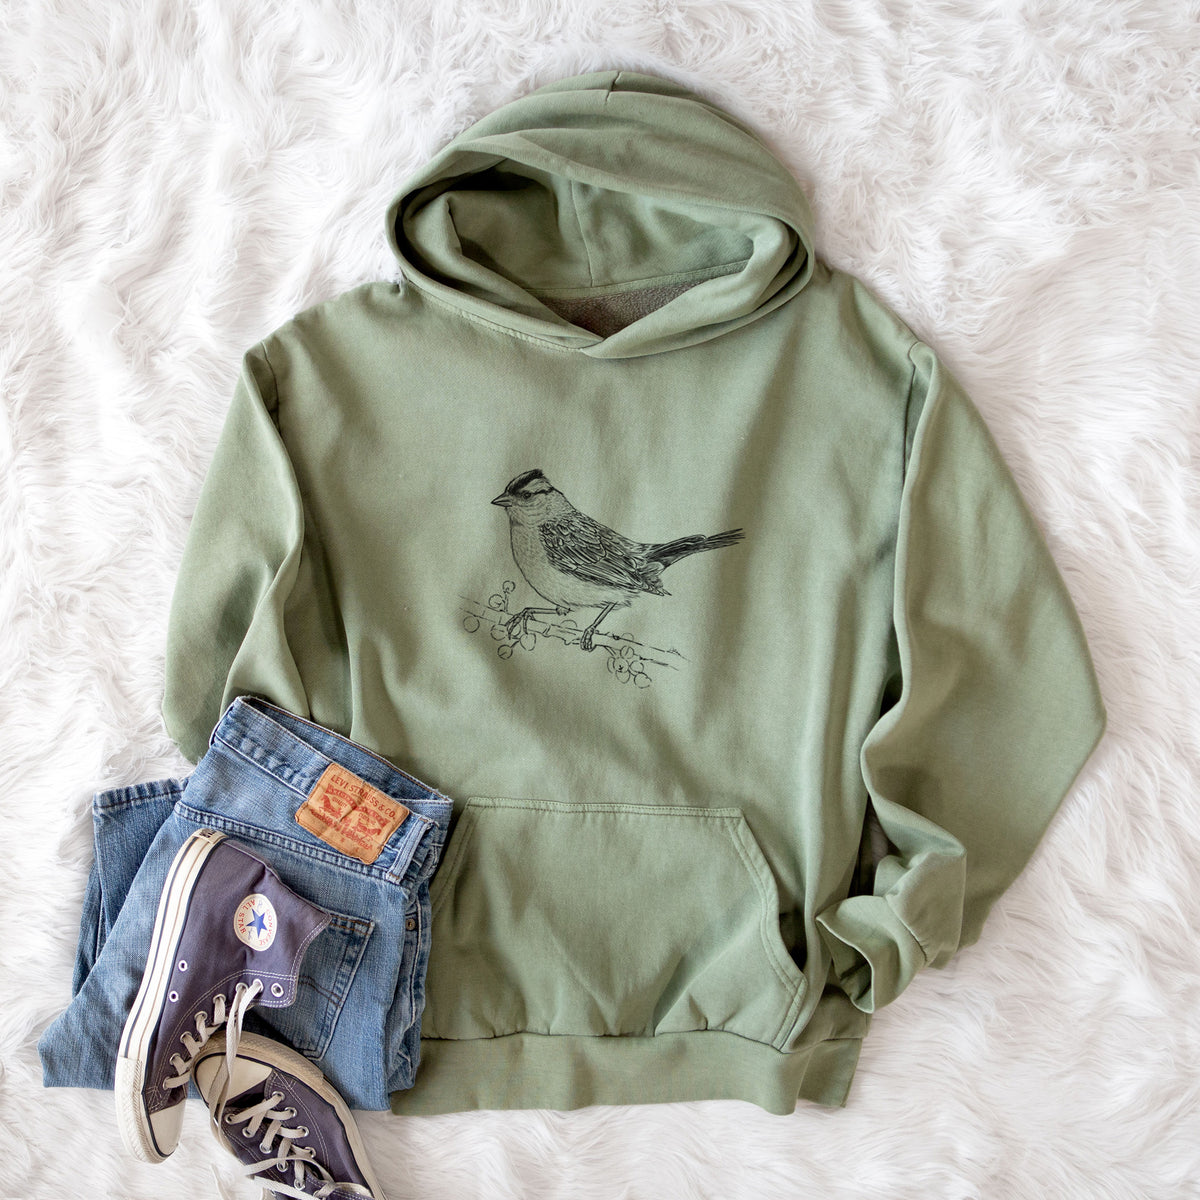 White-crowned Sparrow - Zonotrichia leucophrys  - Urban Heavyweight Hoodie